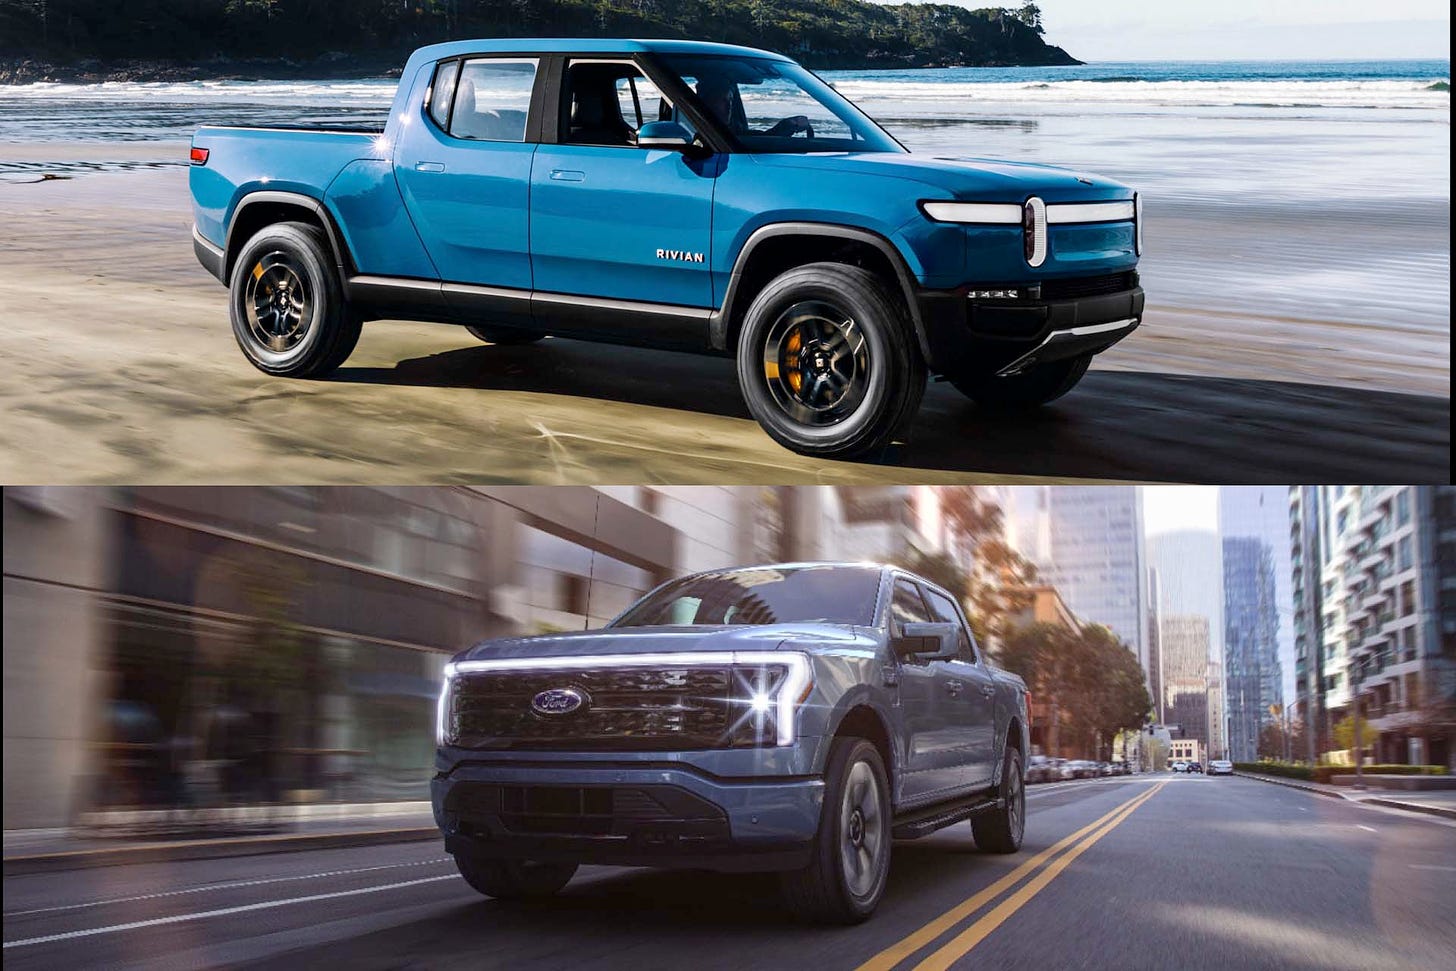 2022 Ford F-150 Lightning vs. 2021 Rivian R1T: Electric truck face-off